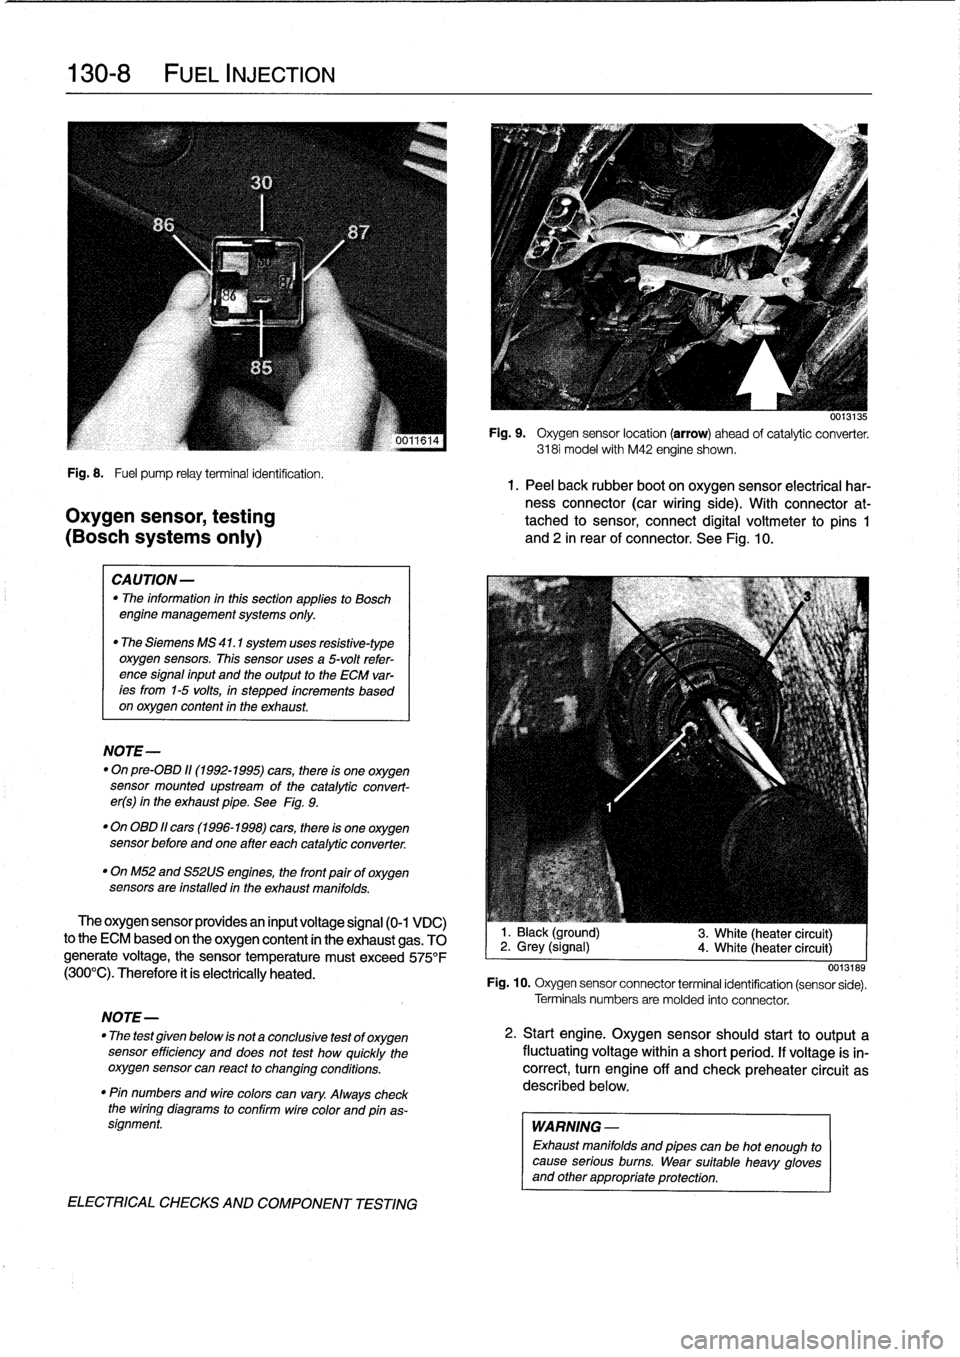 BMW 318i 1992 E36 Workshop Manual 
130-
8

	

FUEL
INJECTION

Fig
.
8
.

	

Fuel
pump
relayterminal
identification
.
1.
Peel
back
rubber
boot
on
oxygen
sensor
electrical
har-
ness
connector
(car
wiring
side)
.
With
connector
at-
Oxyge